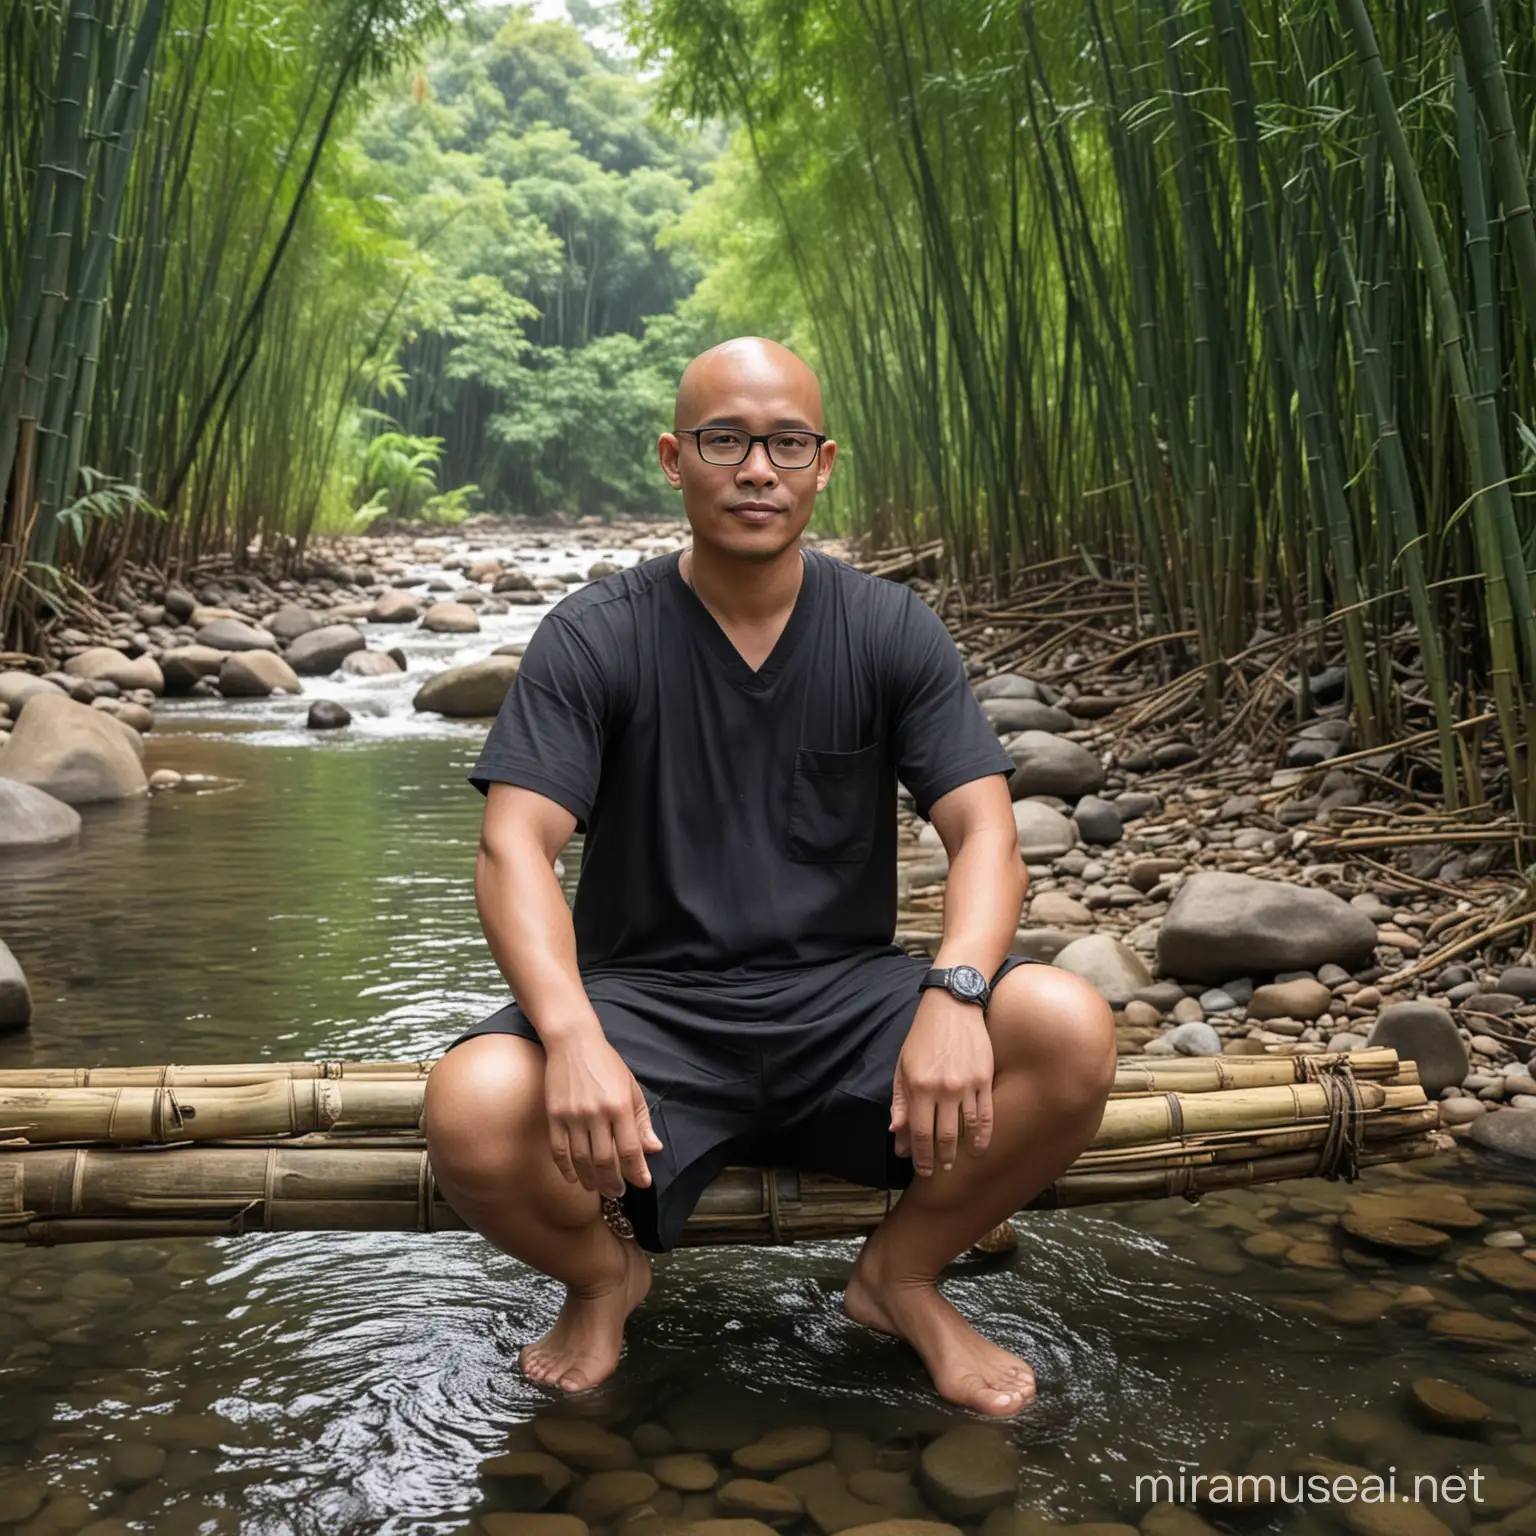 Bald Indonesian Man in Bamboo Forest by River